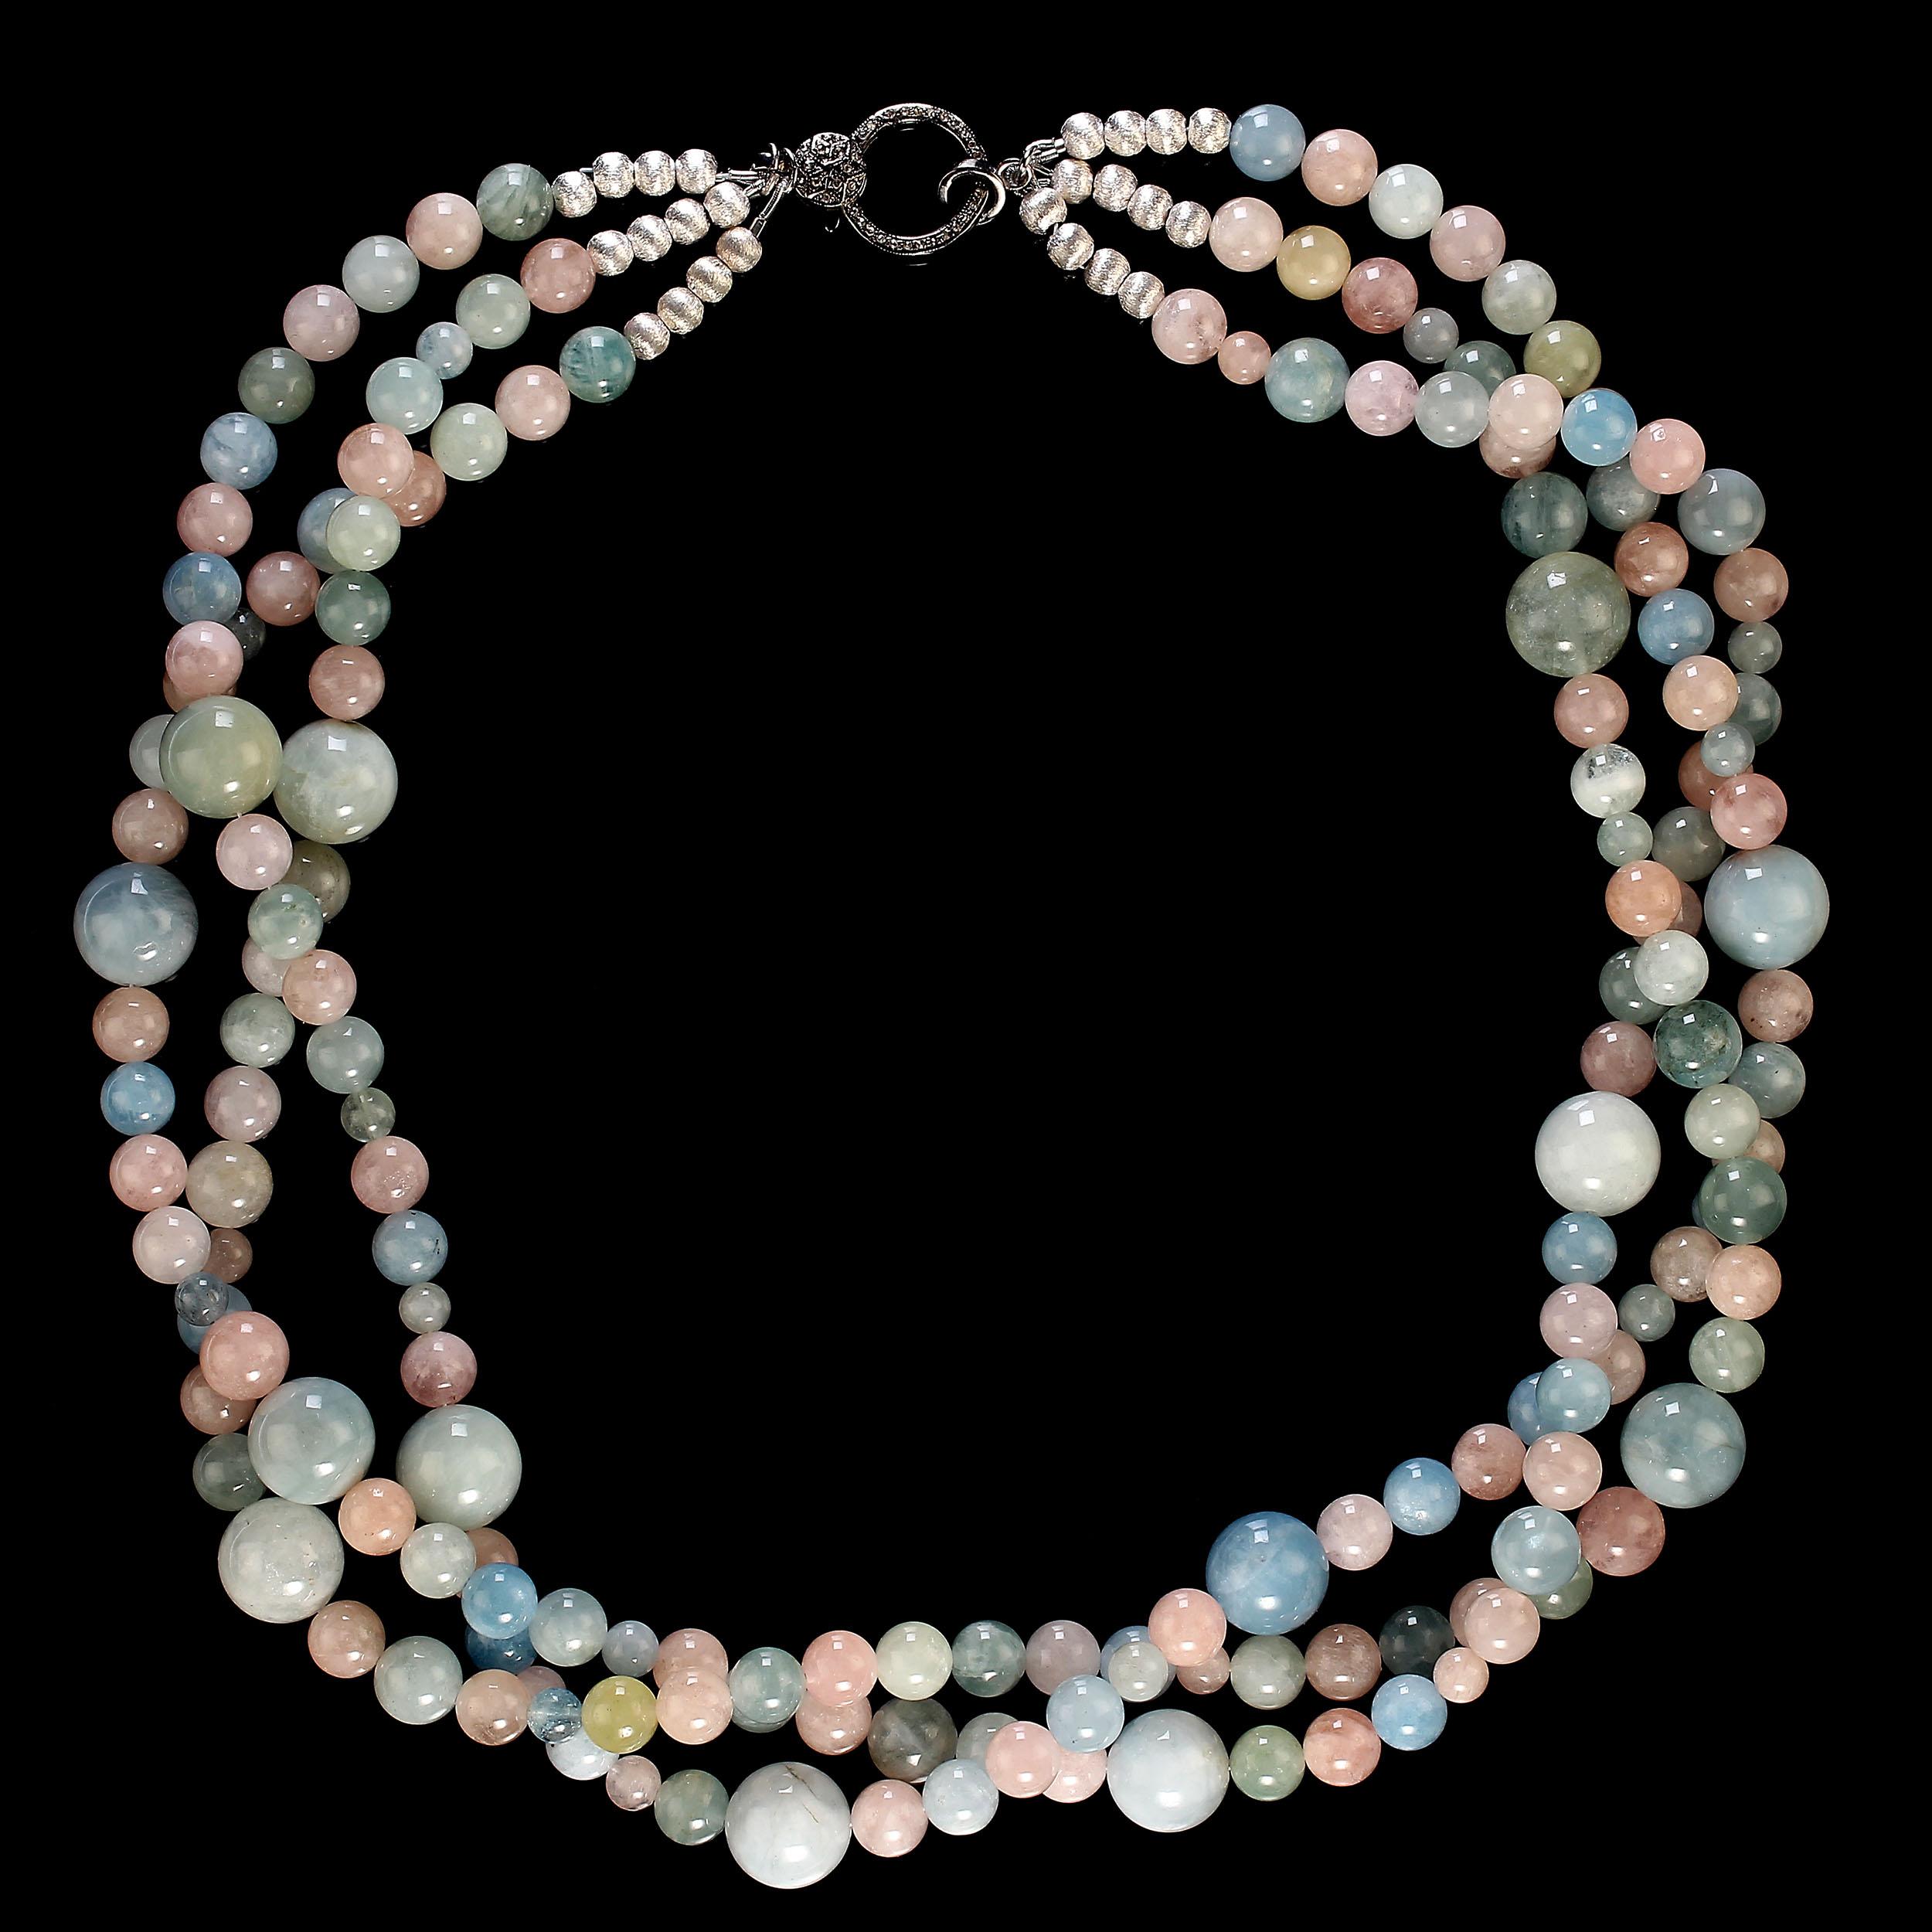 Elegant and original 23-inch three strand necklace of multi color beryls in four different sizes.  These smooth, glowing gemstones are 14, 10, 8, and 6 MM. The necklace is secured with an antiqued sterling silver lobster claw clasp with diamond